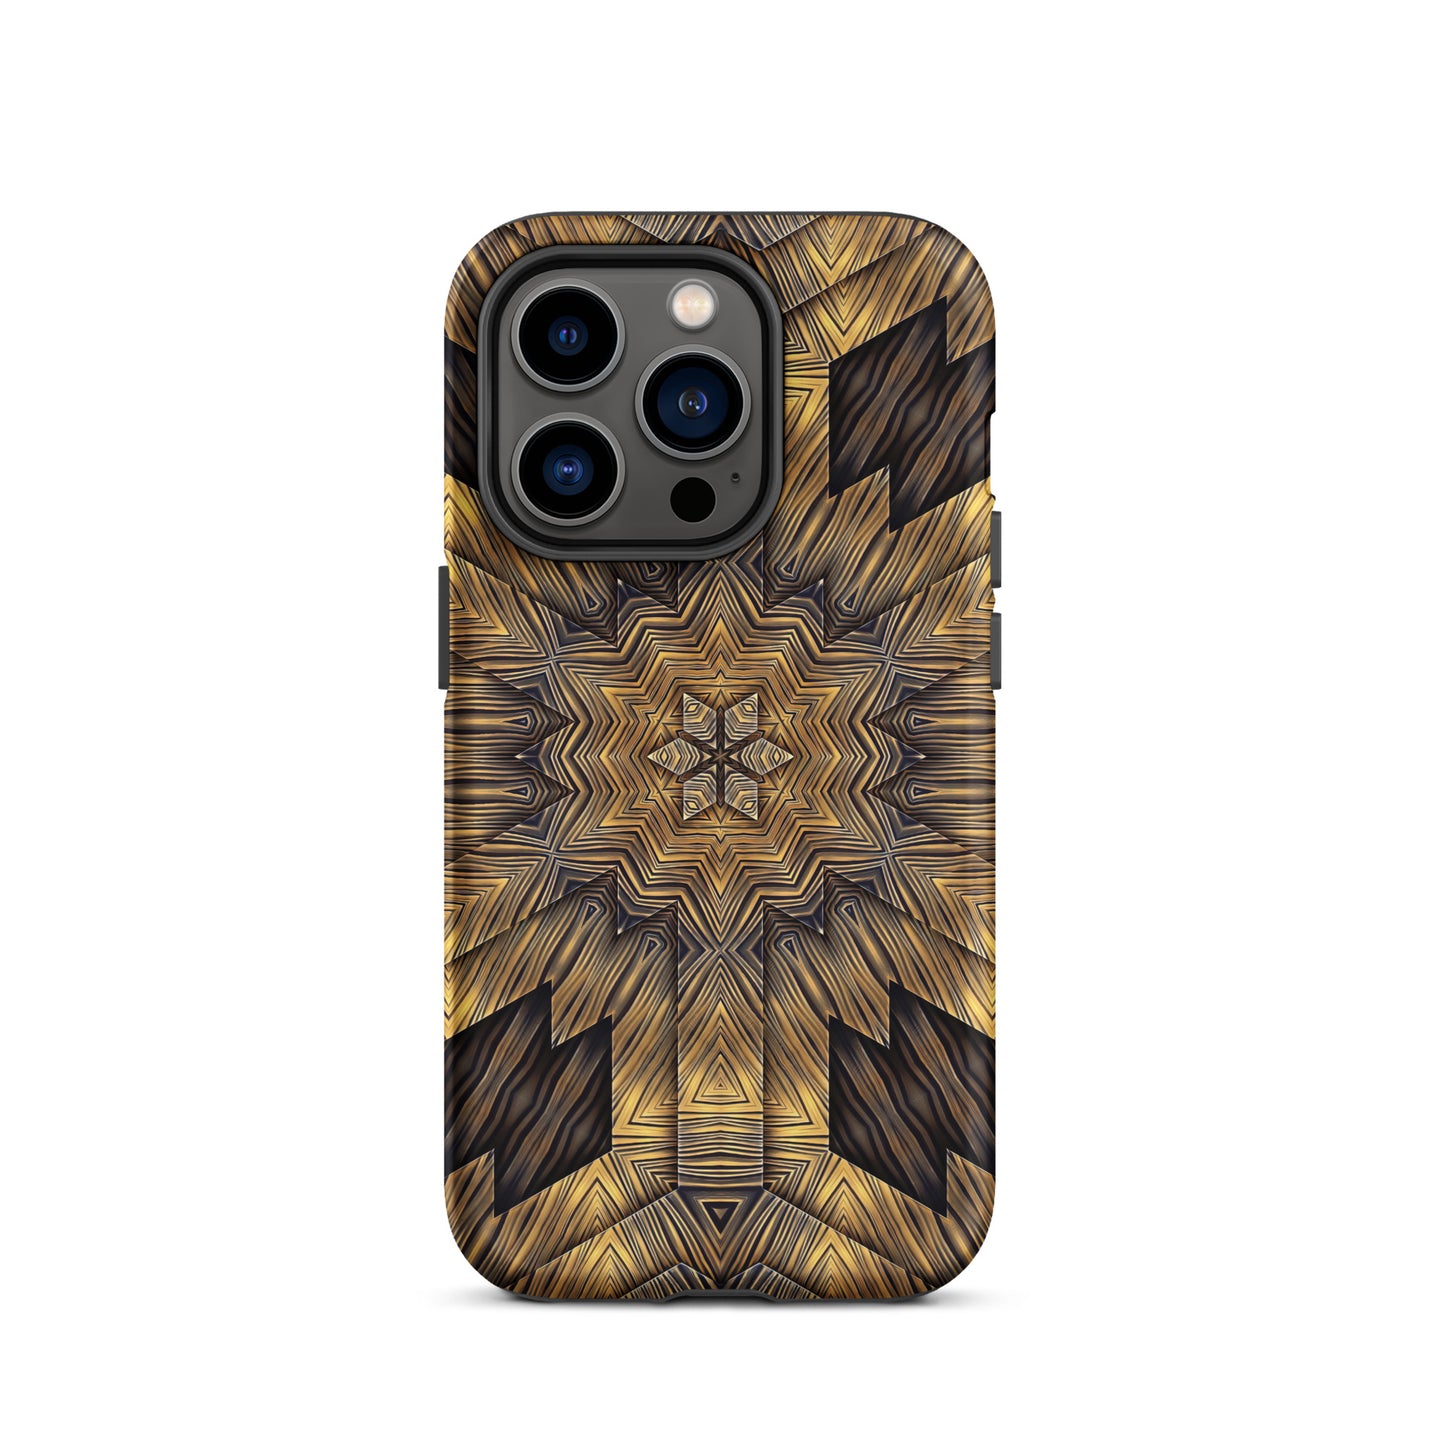 "You Wood Say That" iCanvas Tough iPhone case